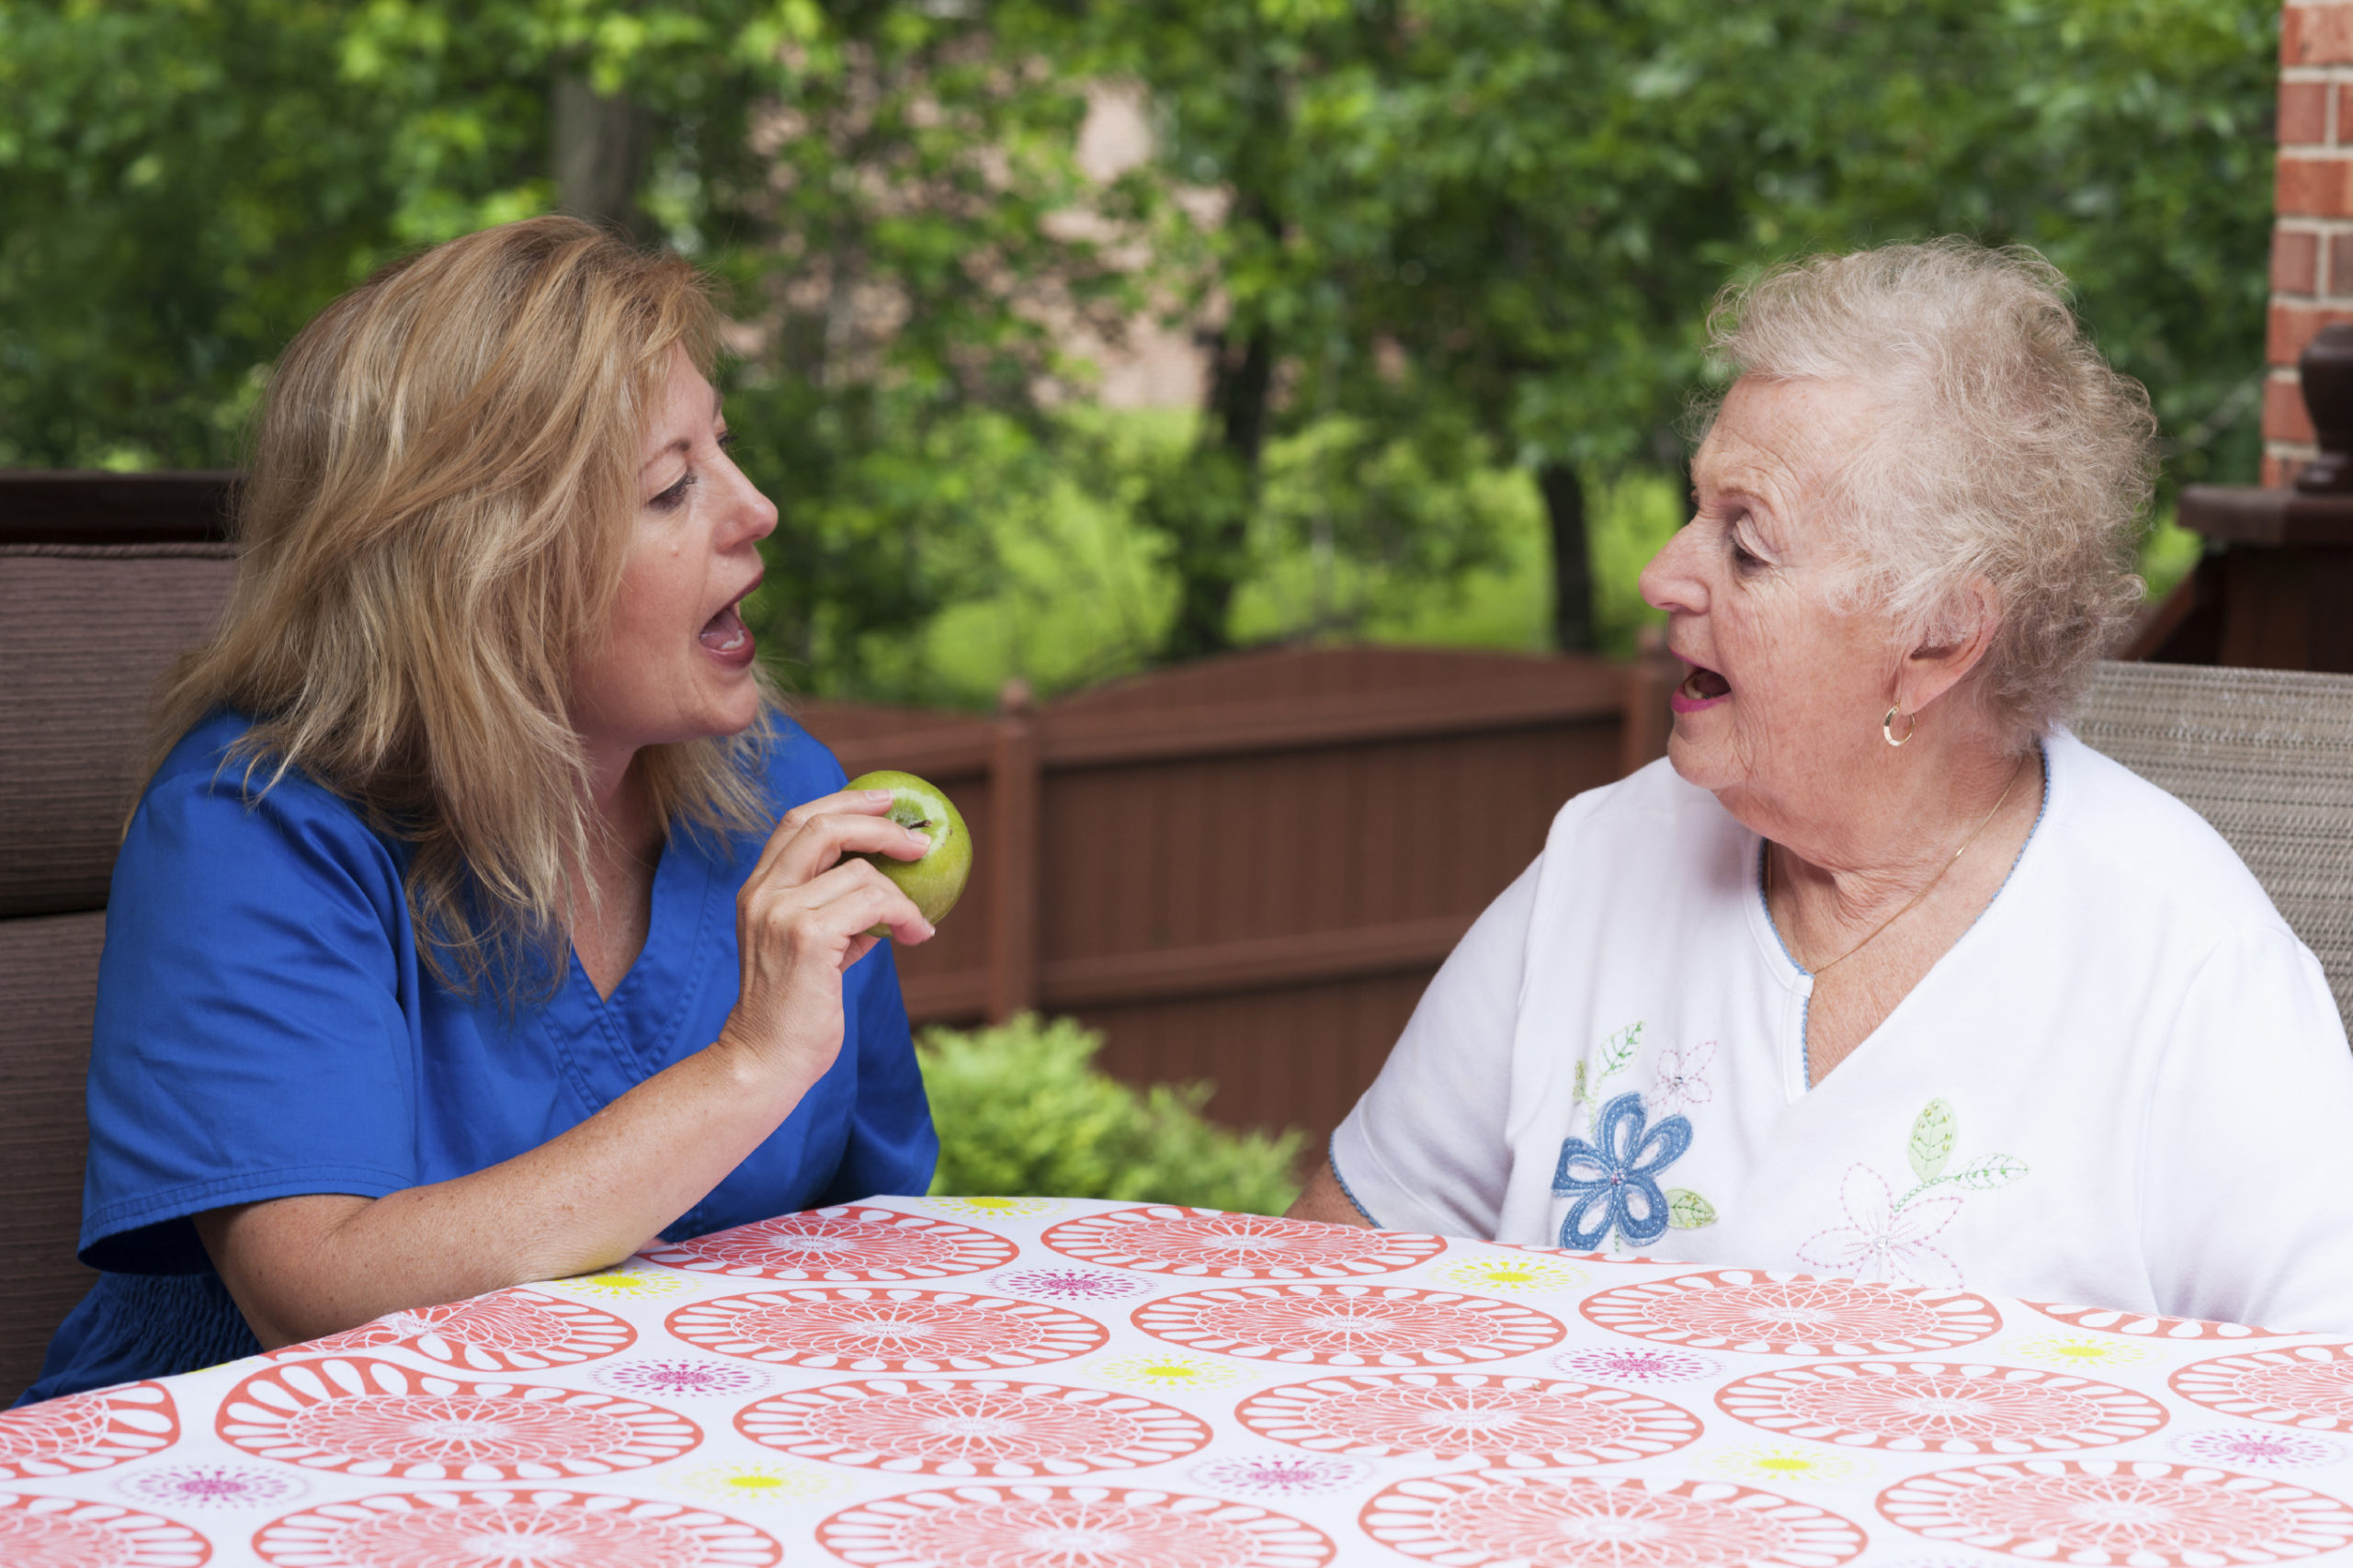 Speech therapist with female stroke patient outdoors during a home health therapy session modeling the production of a consonant during speech training for apraxia